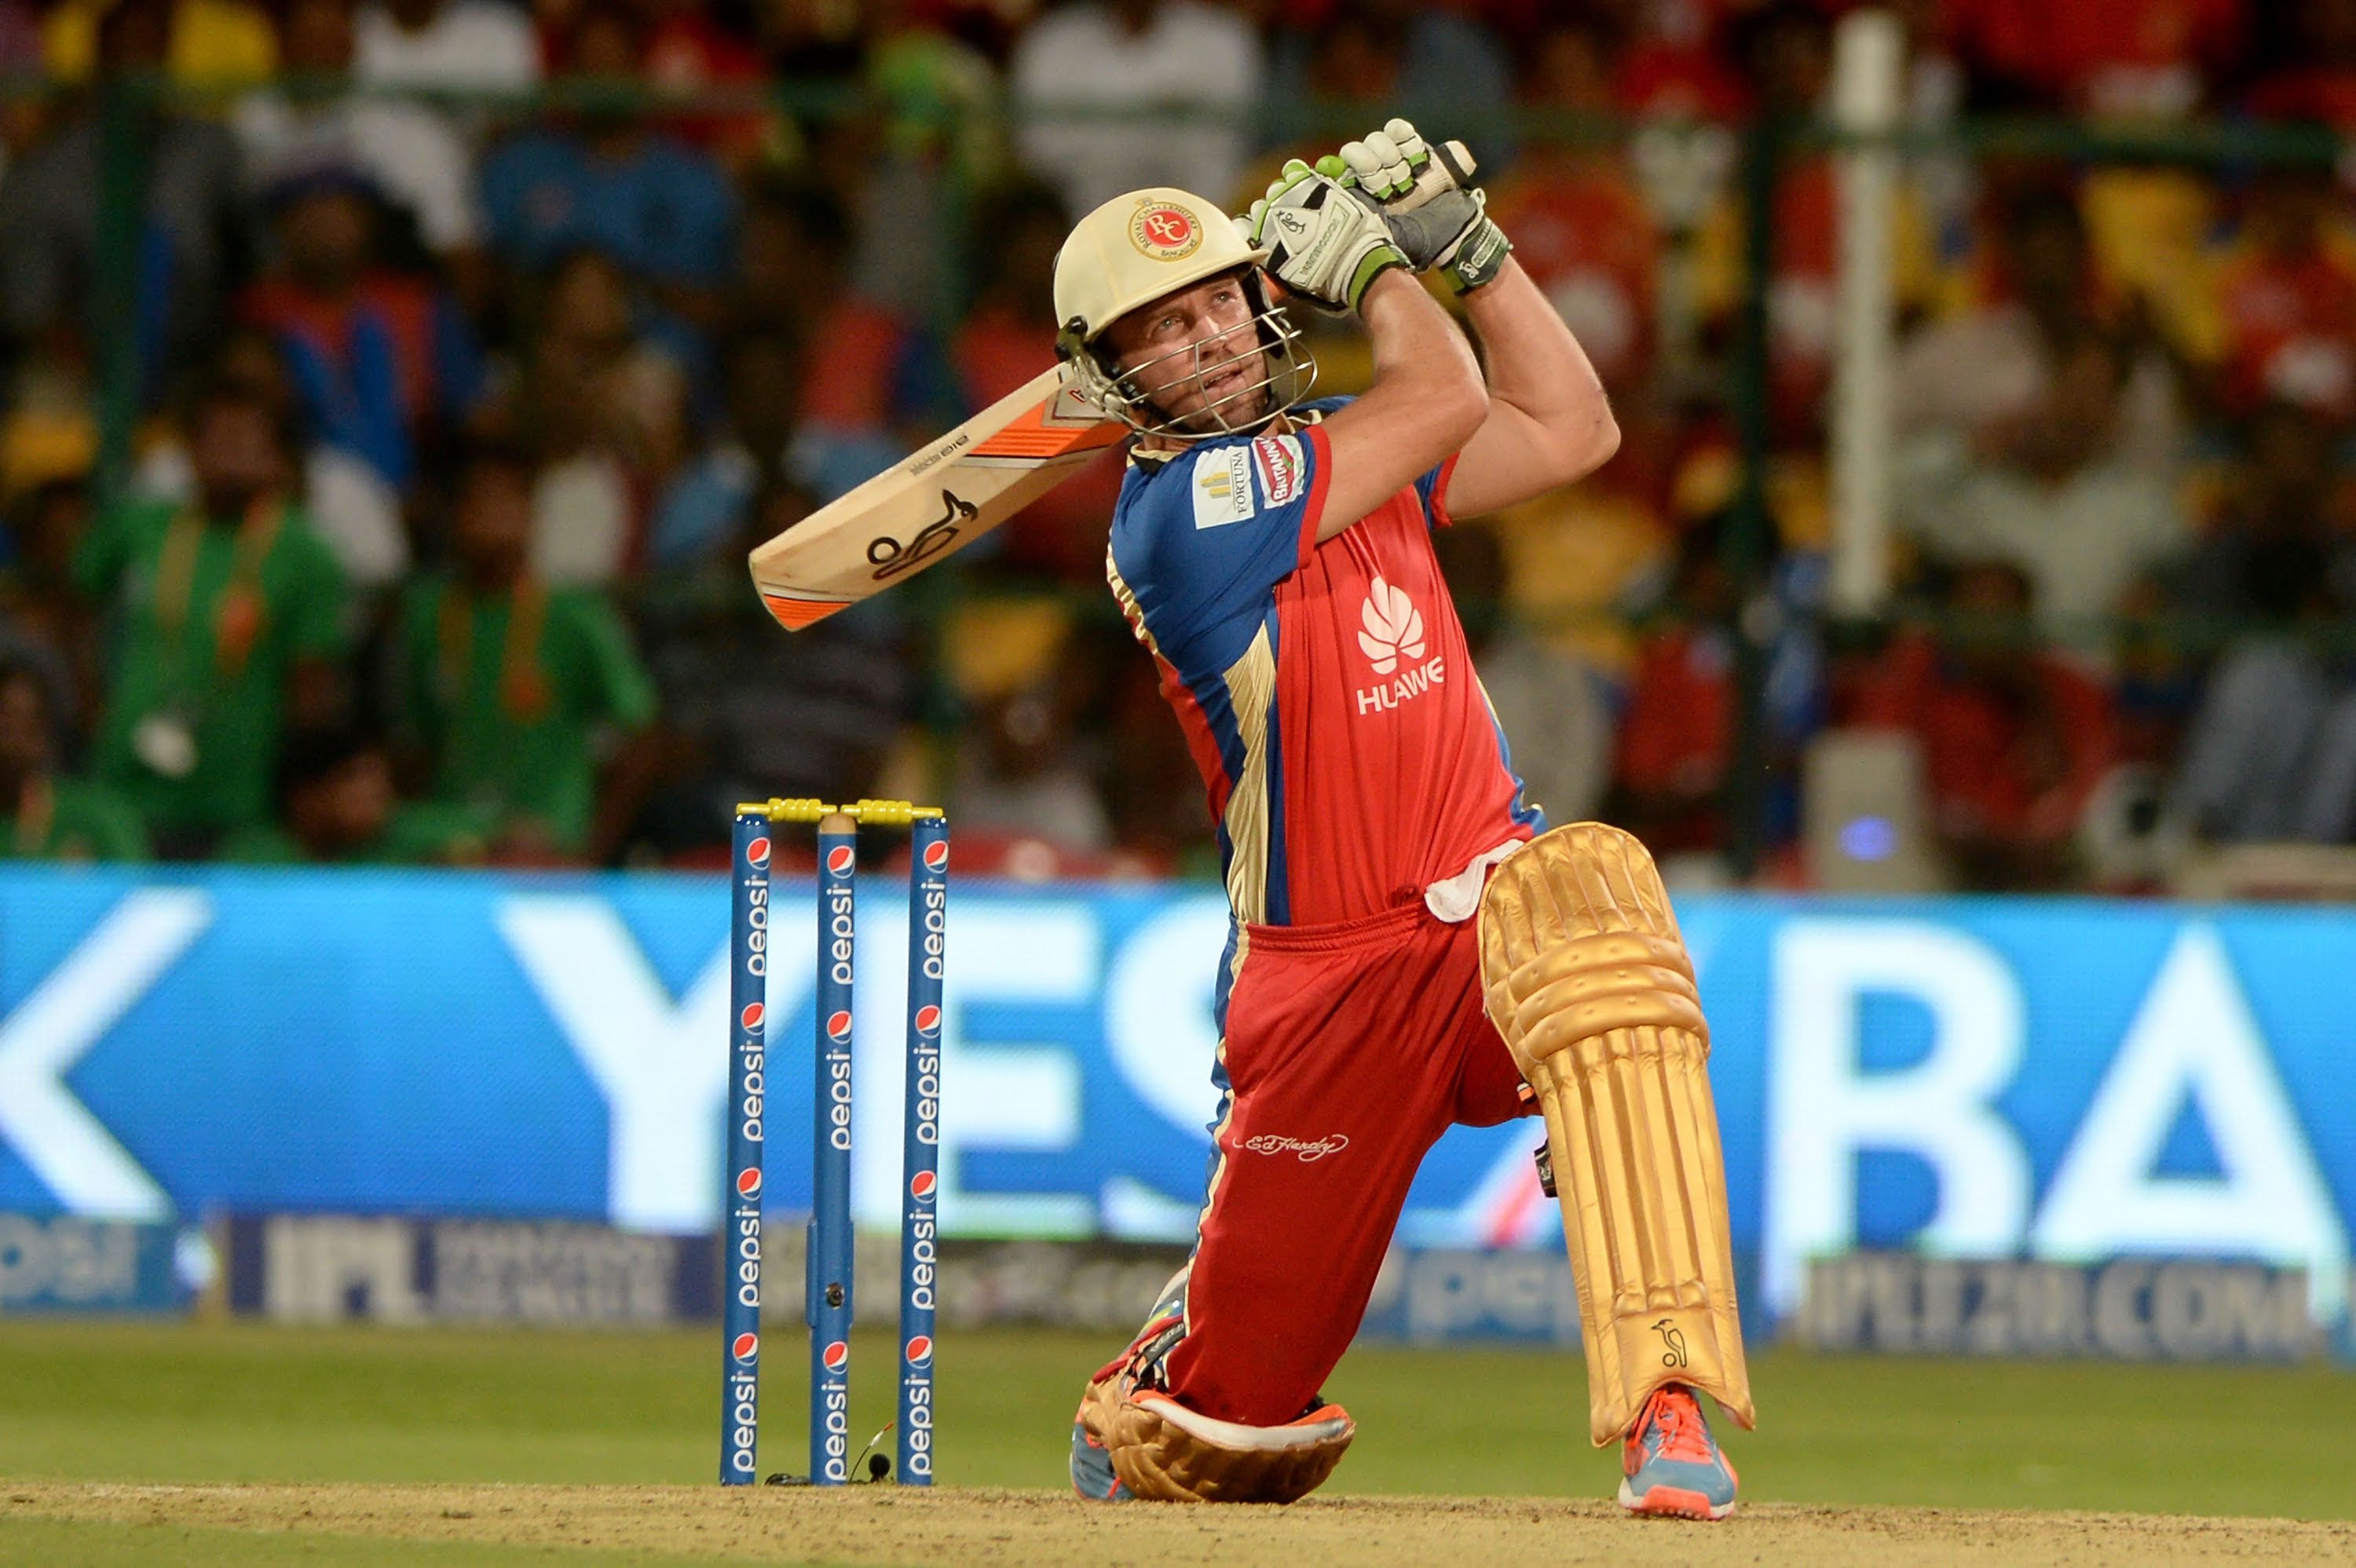 ABD is one of the Most lovable players in IPL